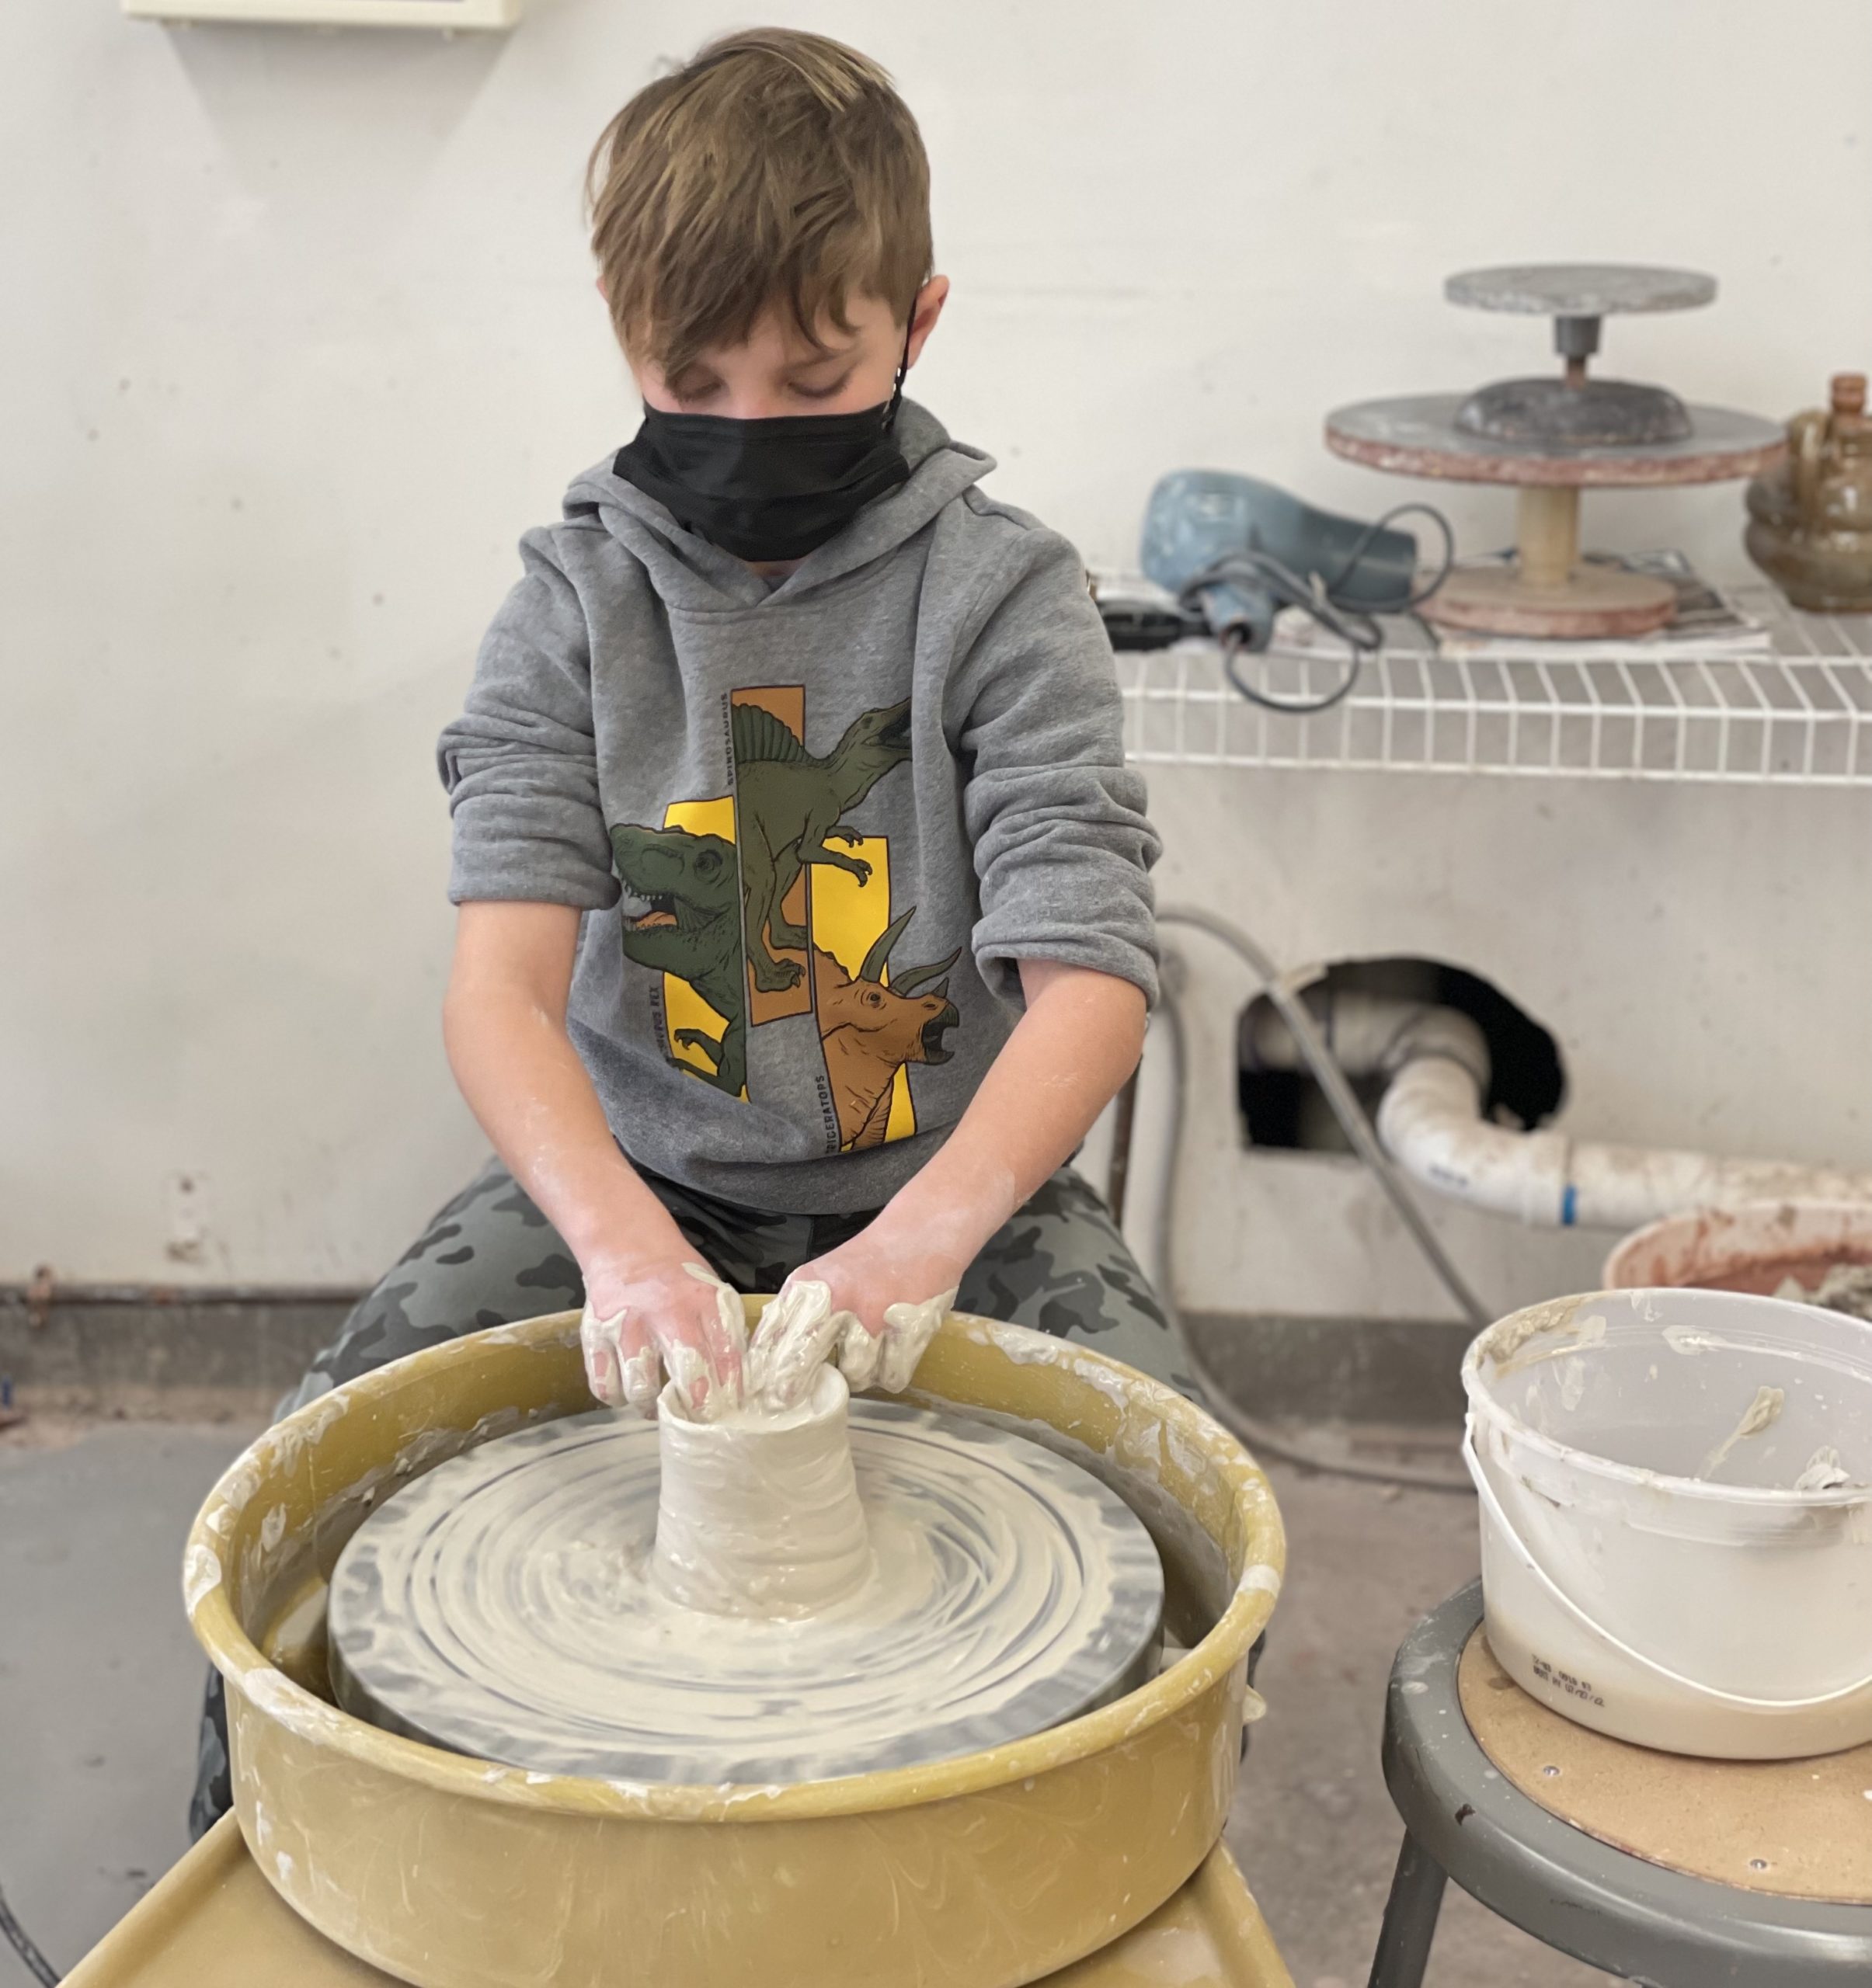 A child sitting at a pottery wheel shaping a piece of clay